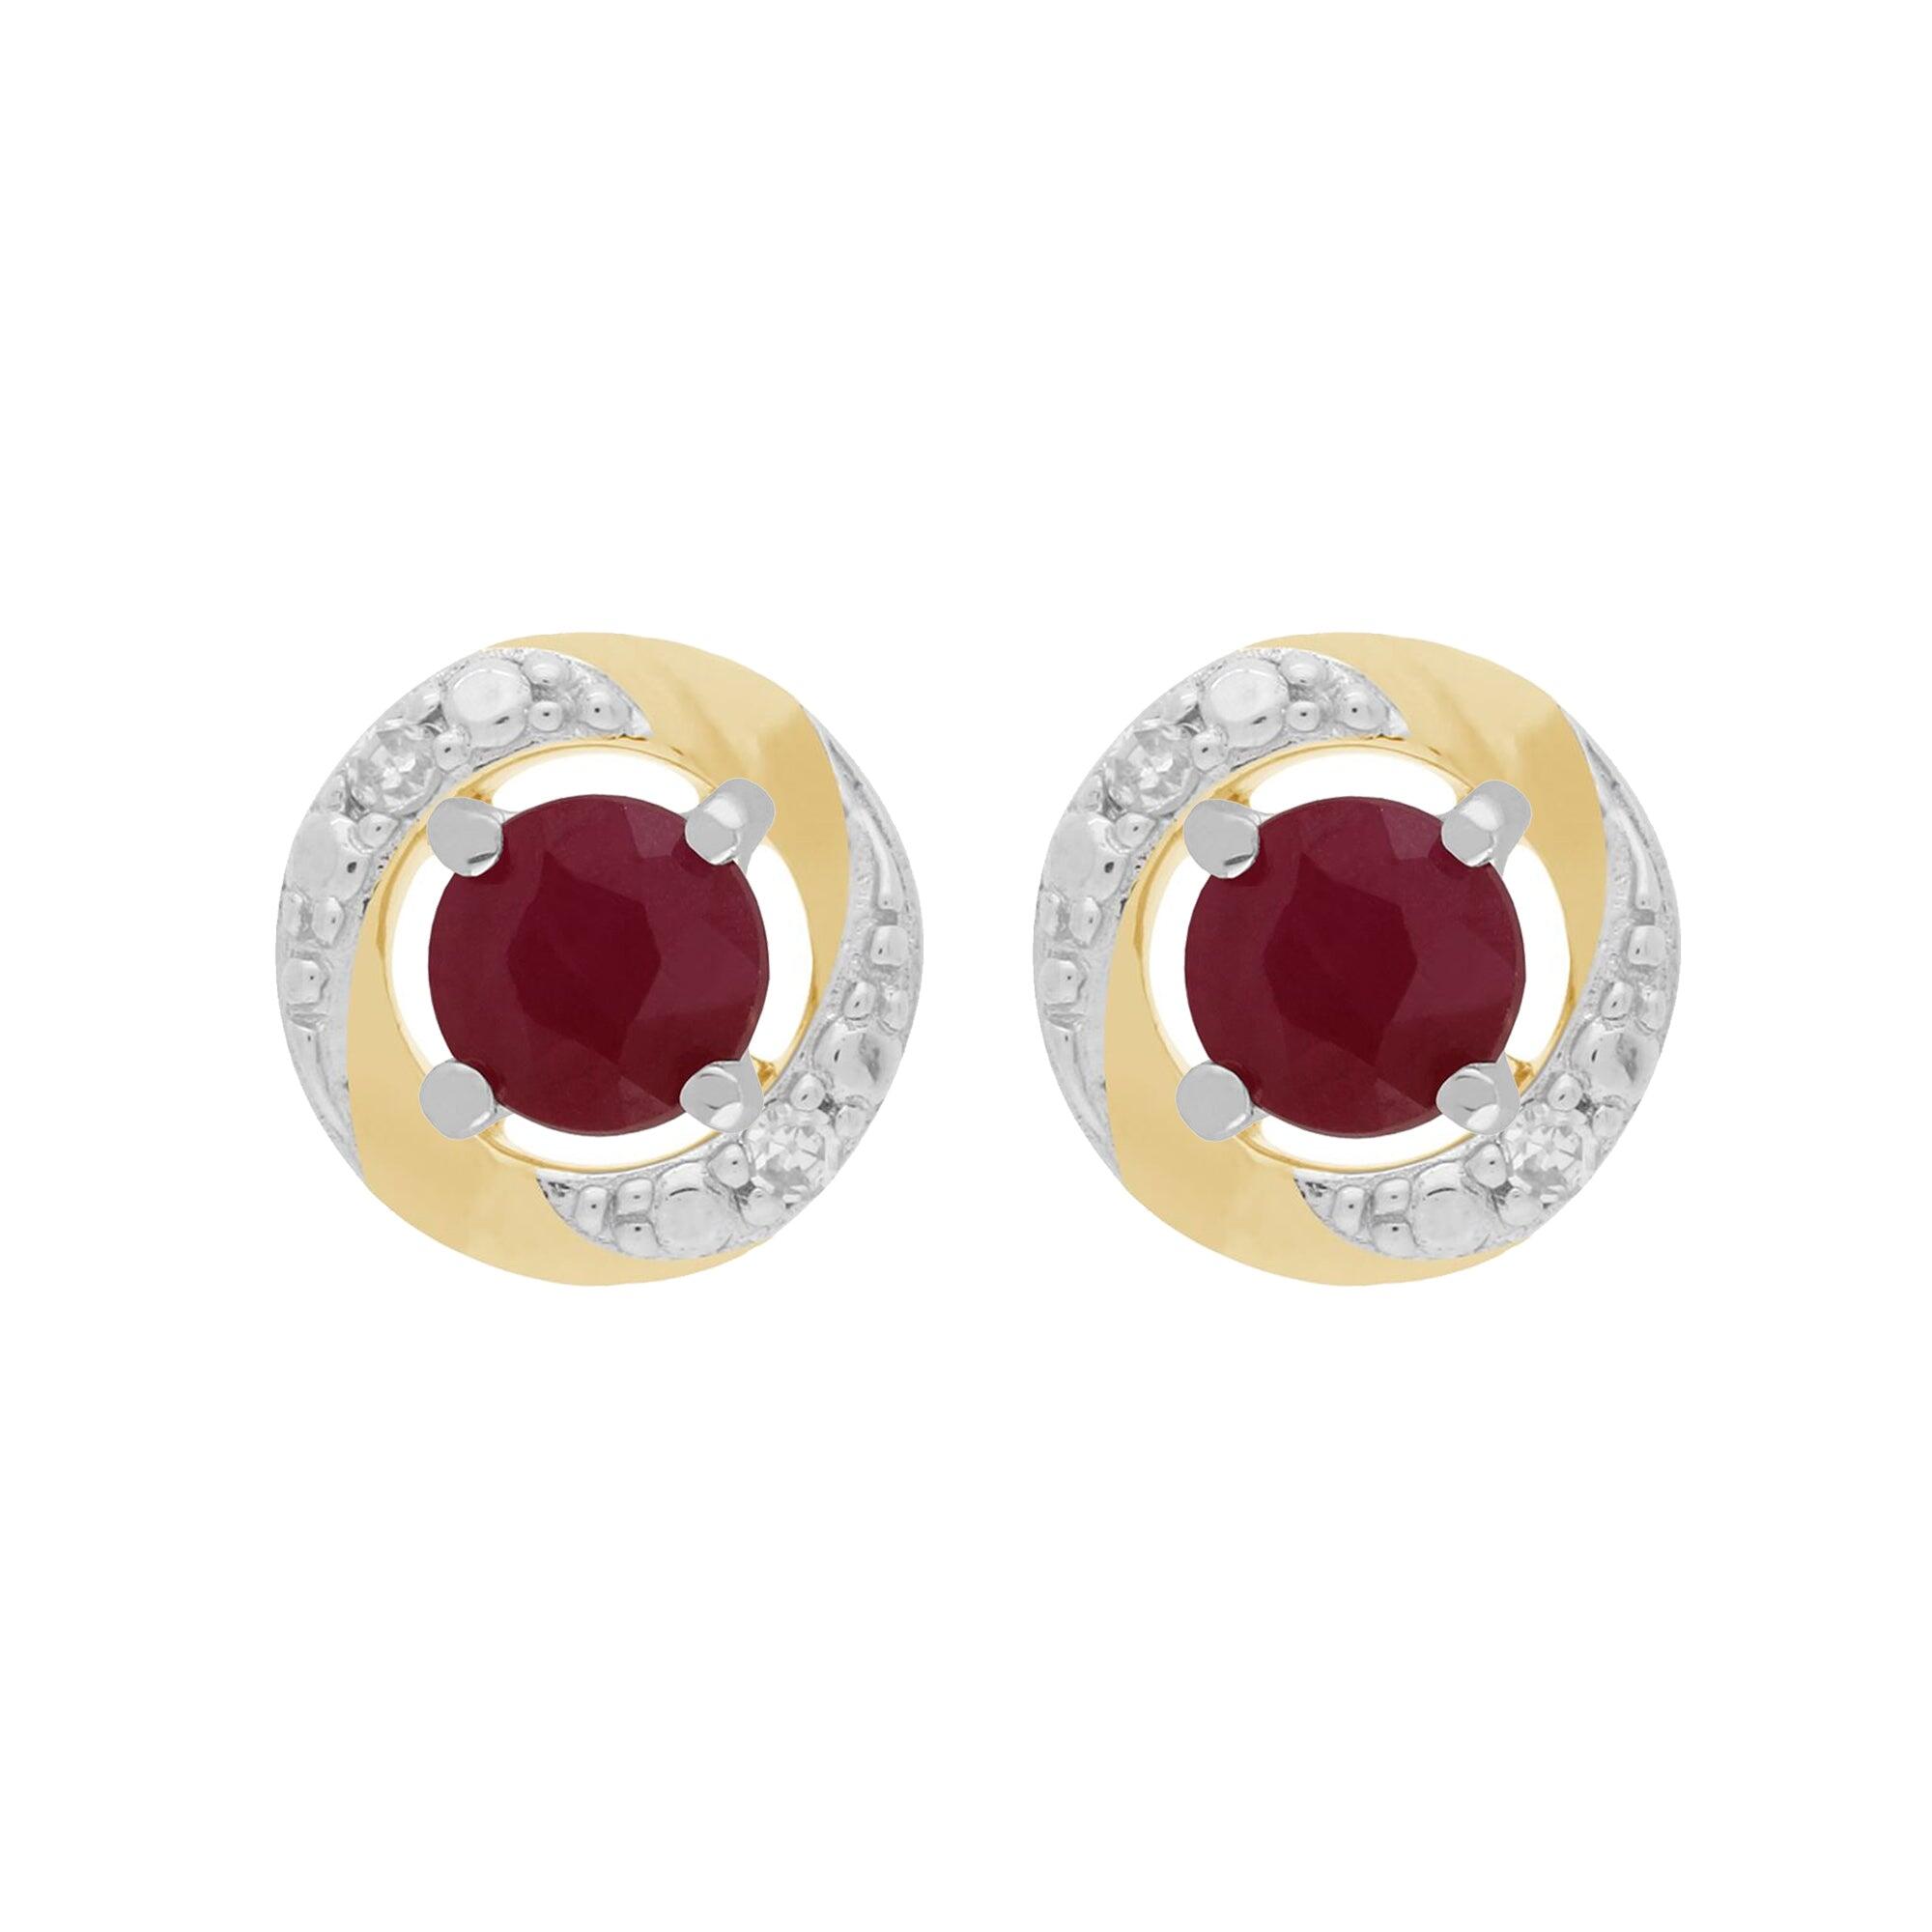 9ct White Gold Ruby Stud Earrings with Detachable Diamond Halo Ear Jacket in 9ct Yellow Gold